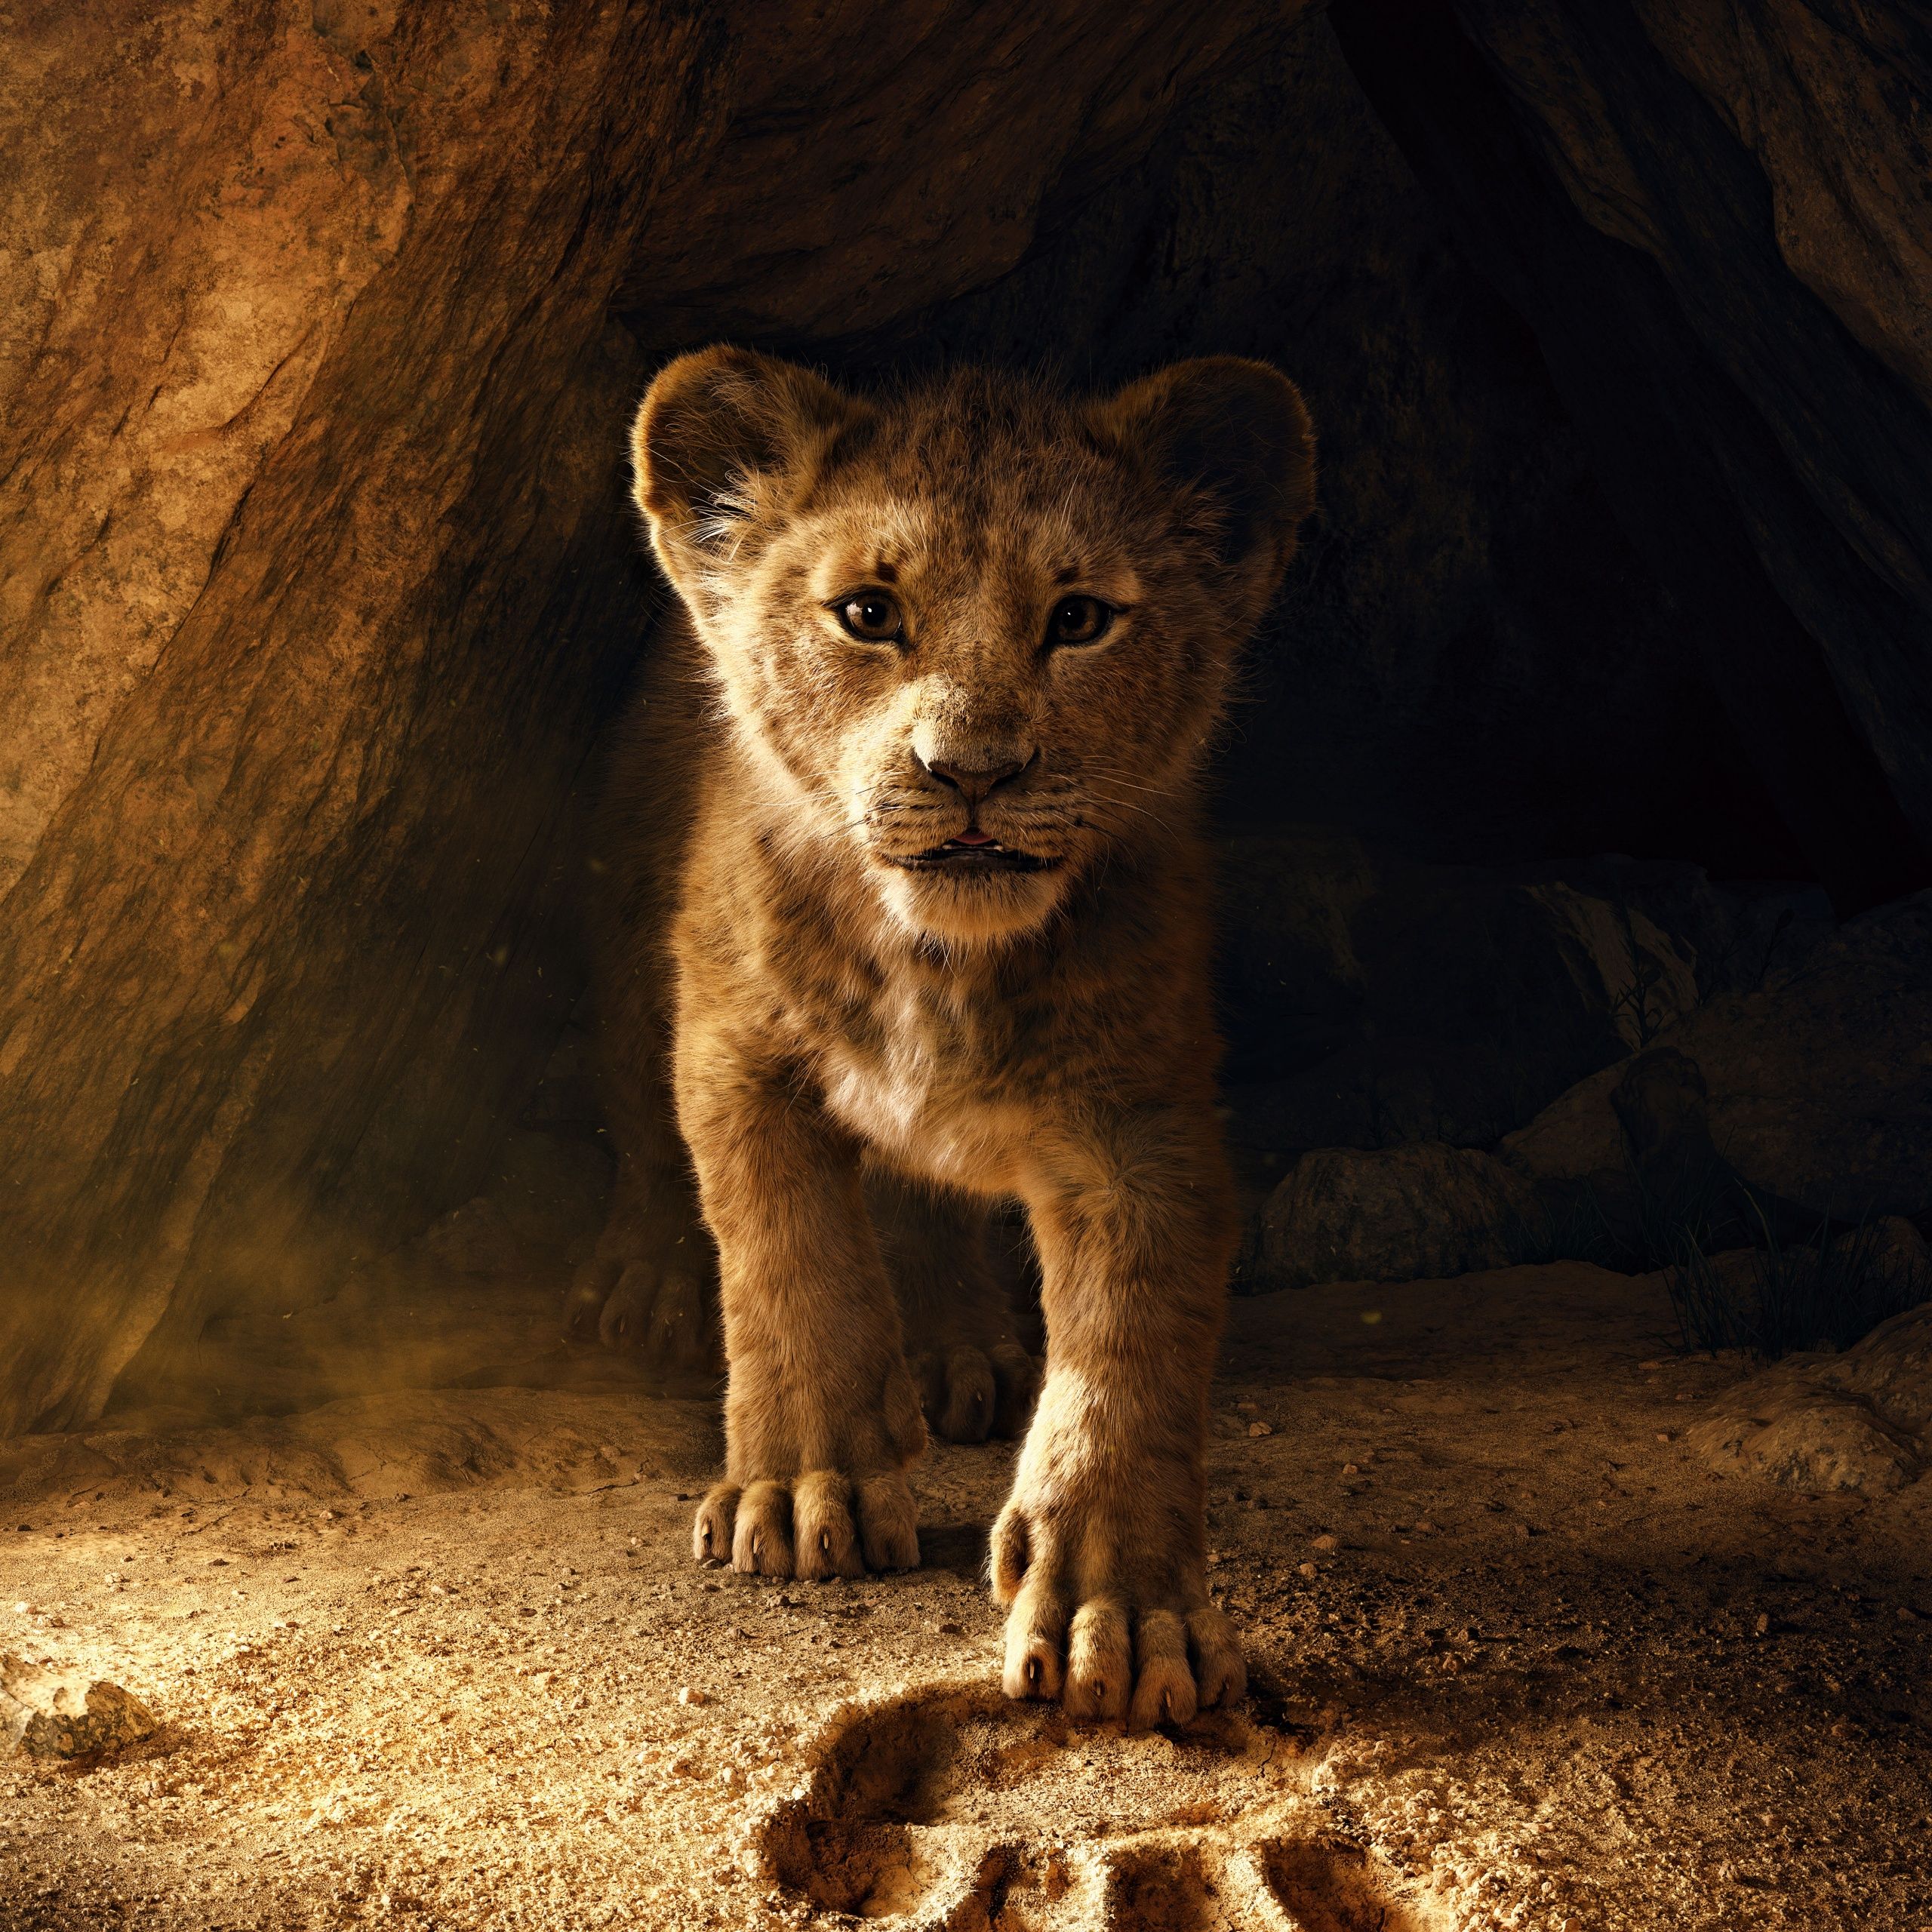 The Lion King (2019) - Simba as a cub - The Lion King